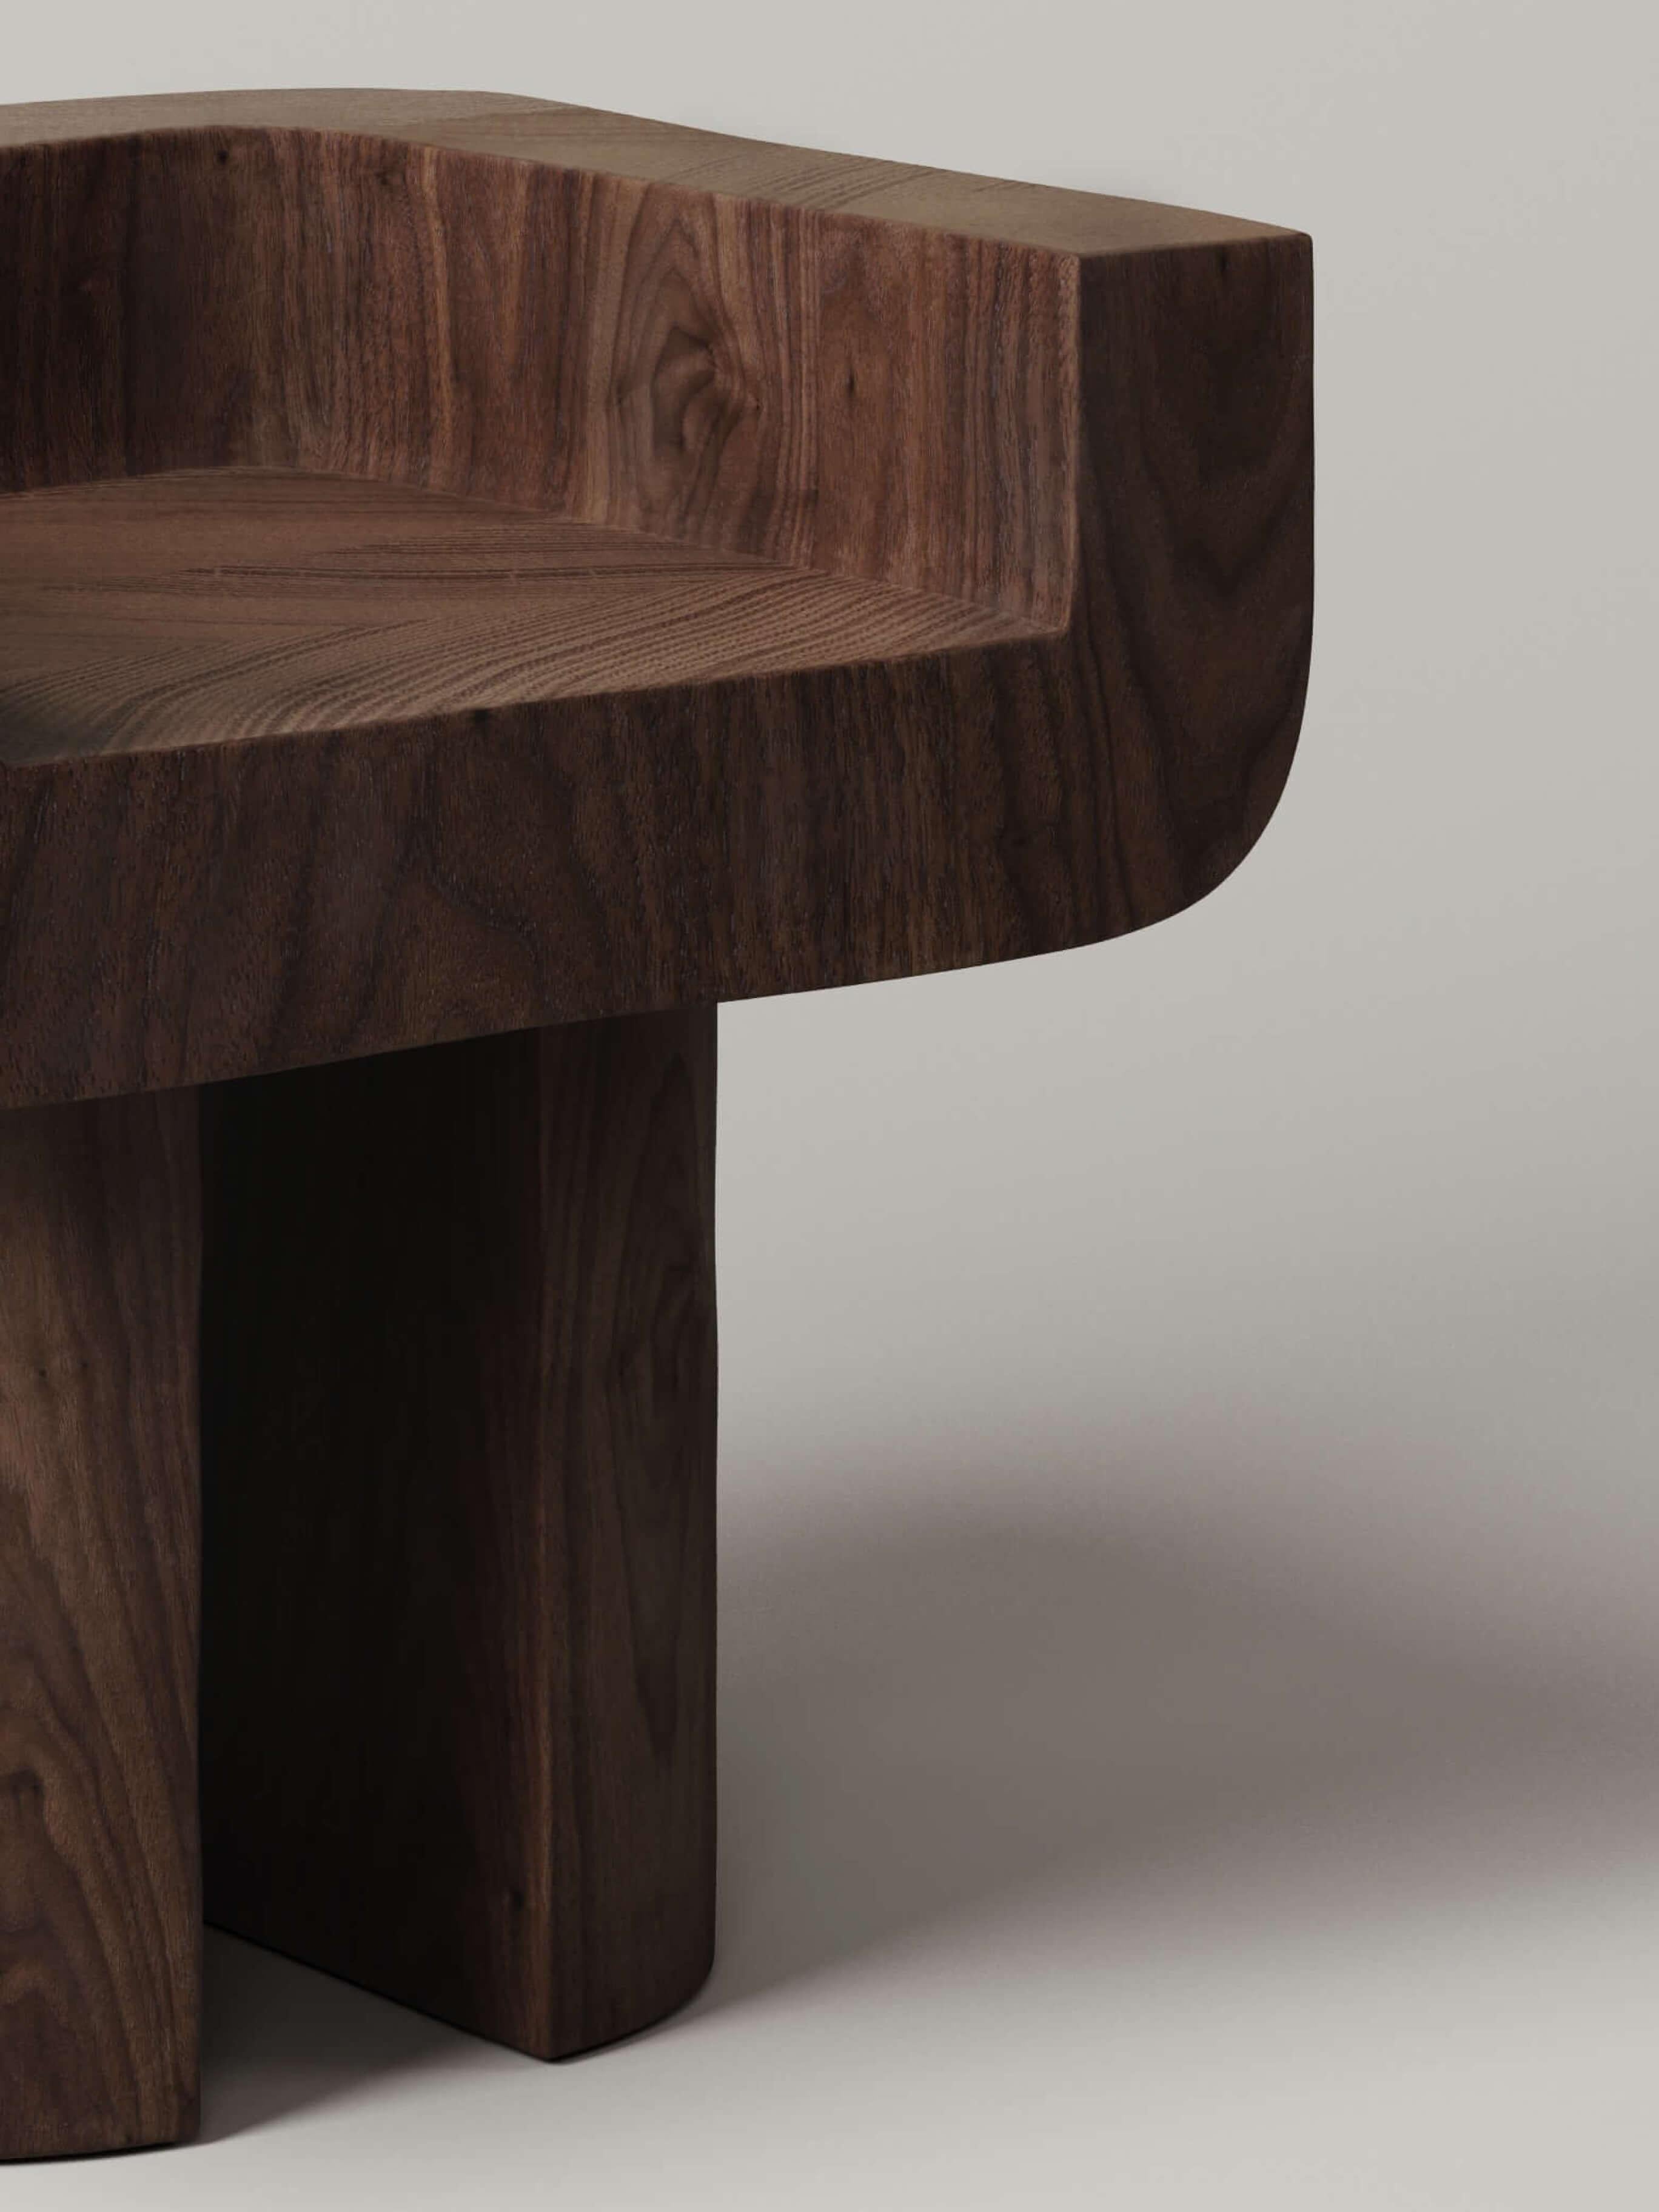 M_001 Chair by Monolith Studio, Walnut In New Condition For Sale In Brooklyn, NY